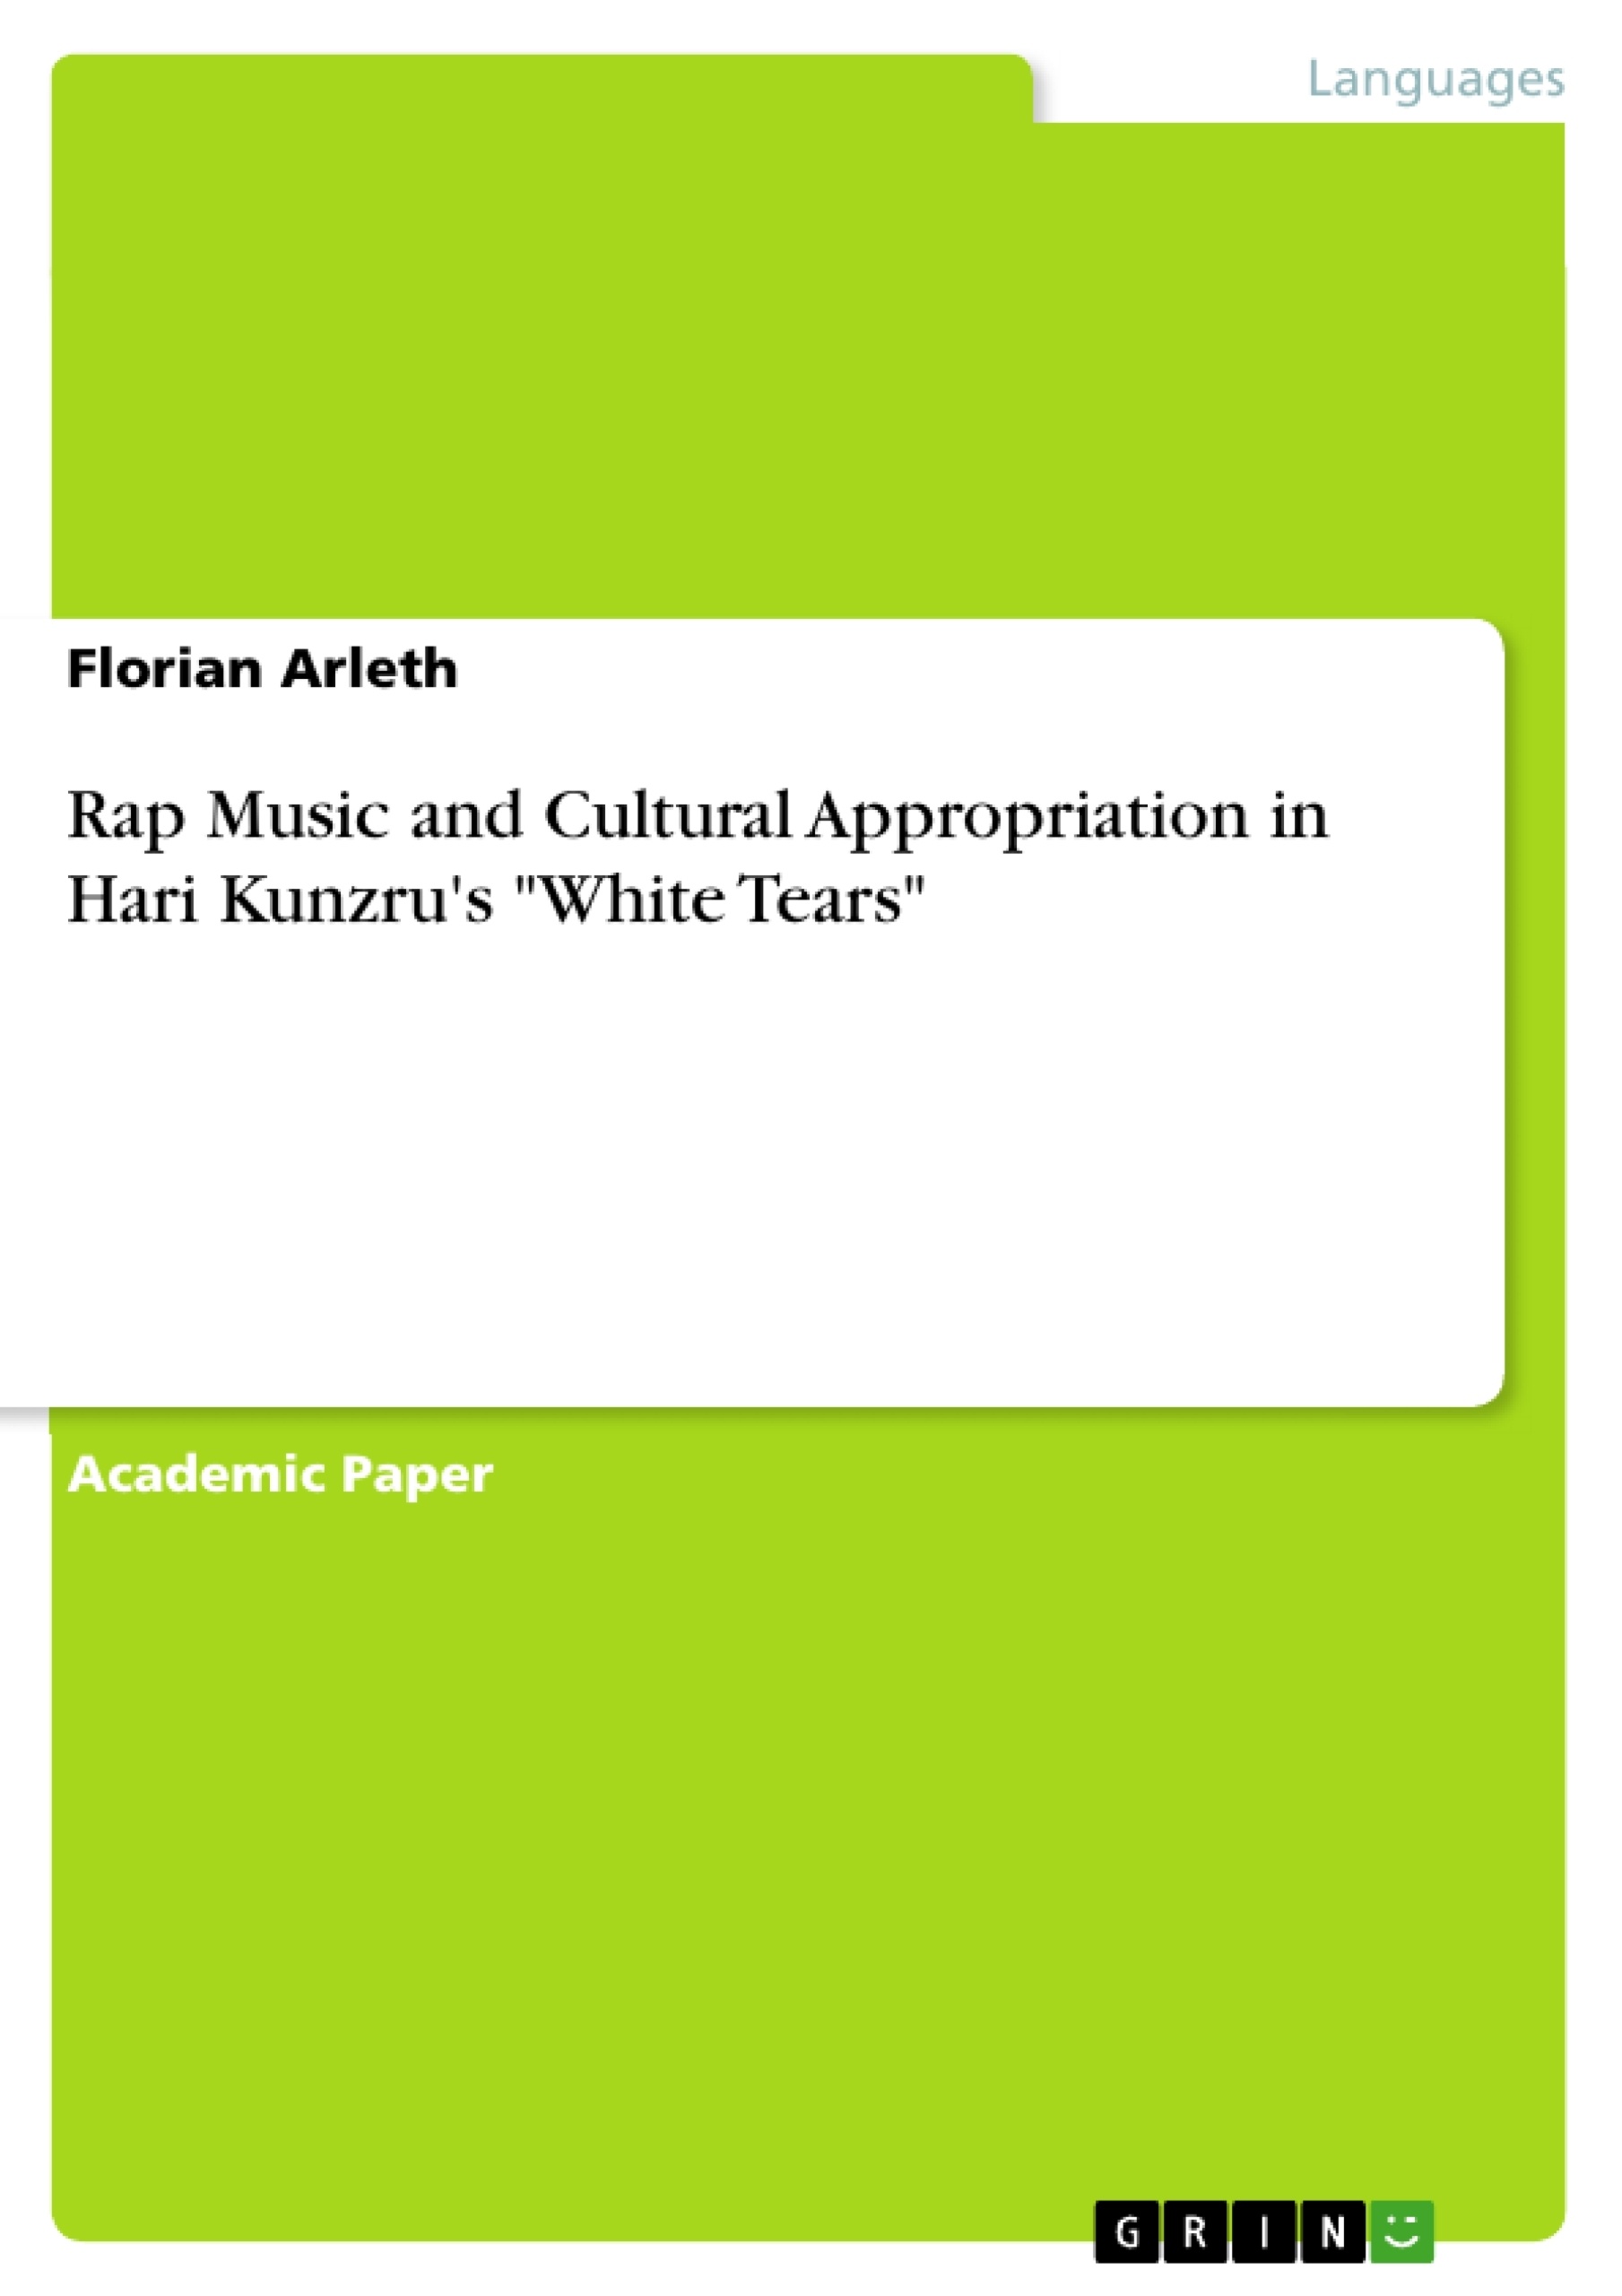 Título: Rap Music and Cultural Appropriation in Hari Kunzru's "White Tears"